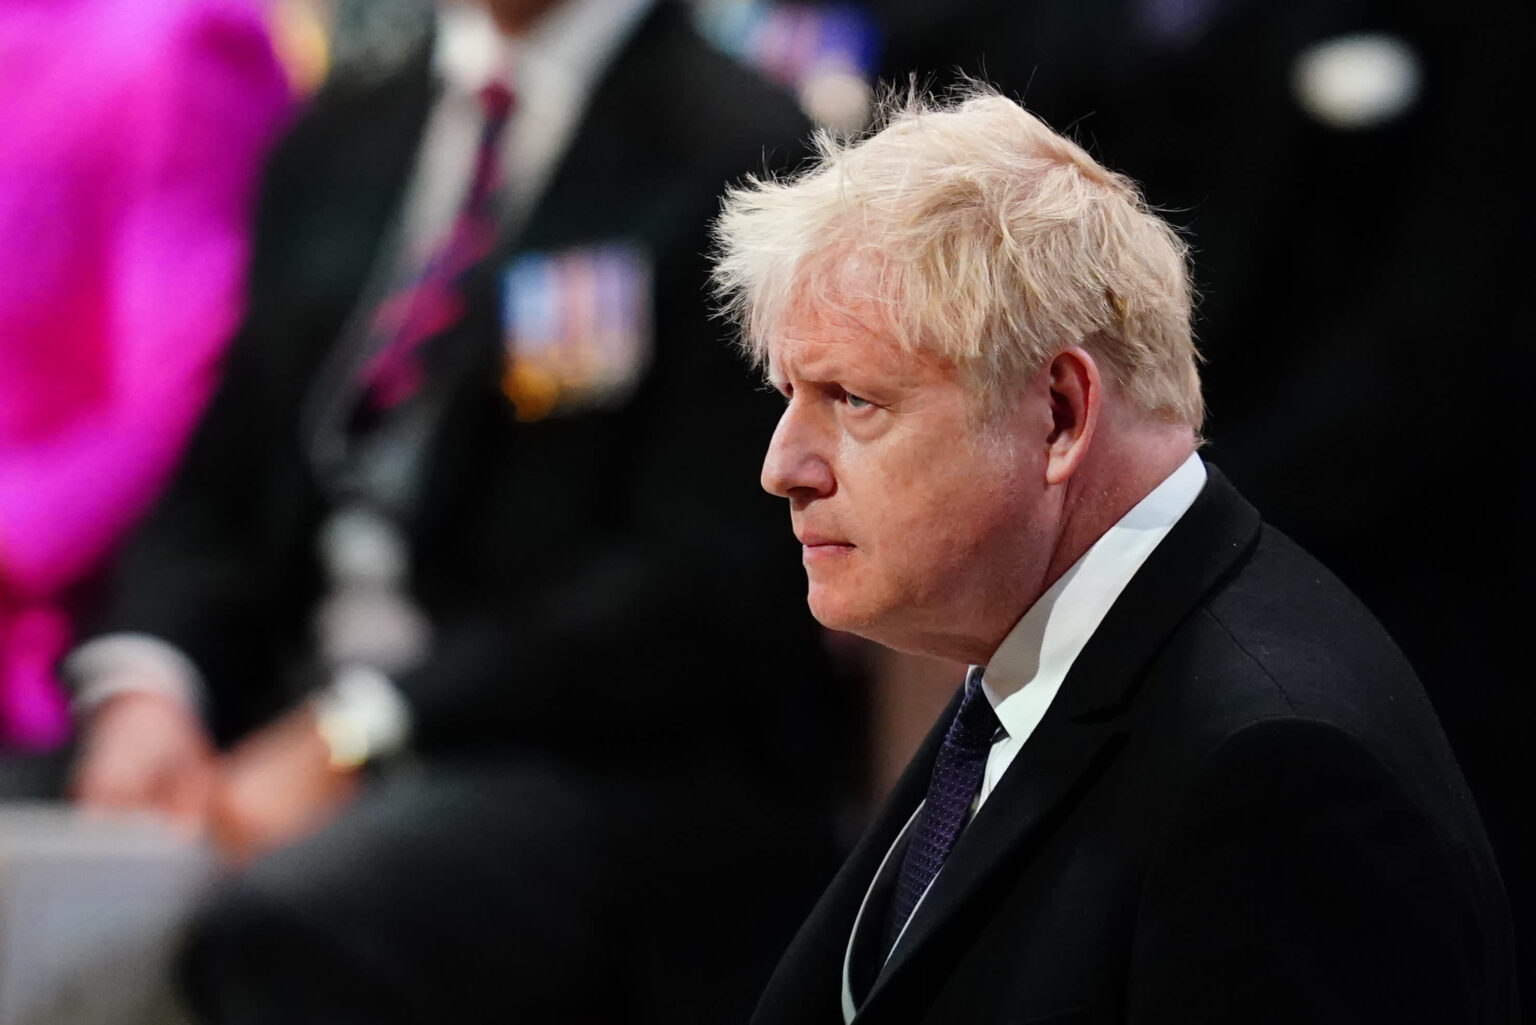 Boris Johnson rules out early general election ‘because voters want him to get s*** done’